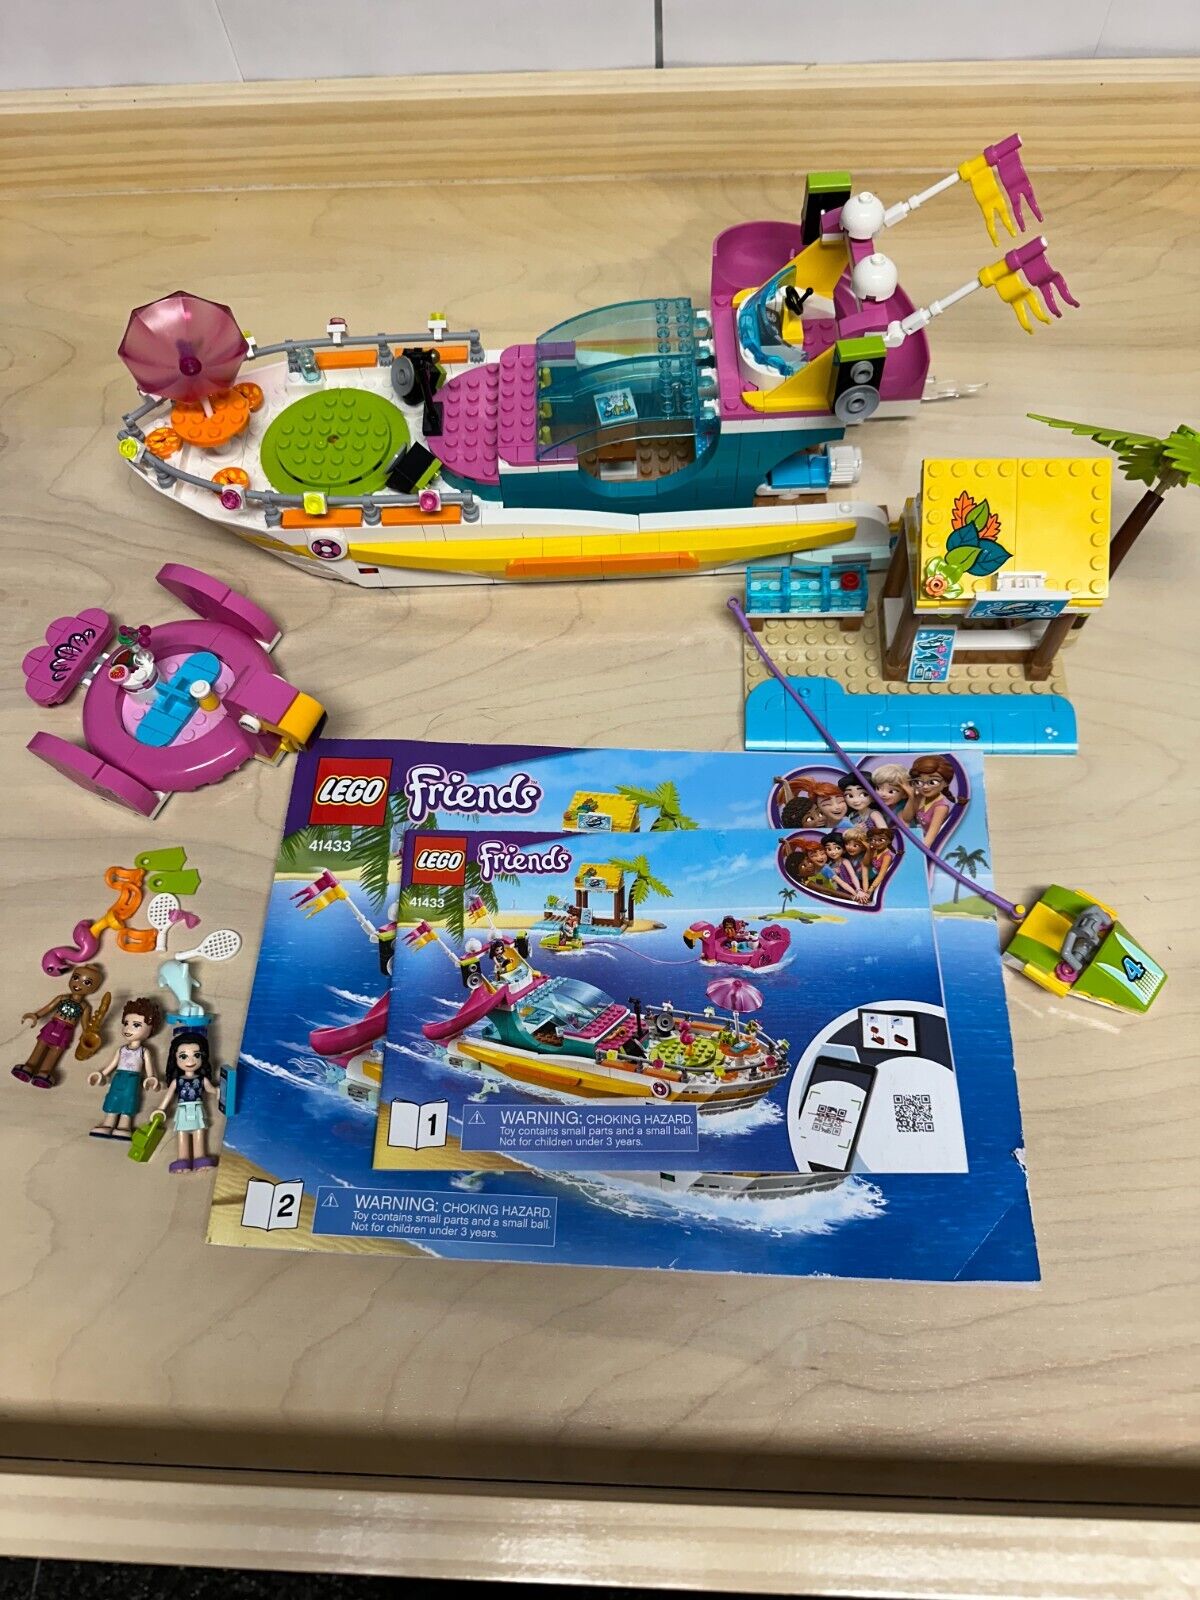 LEGO Friends Set 41433 Party Boat